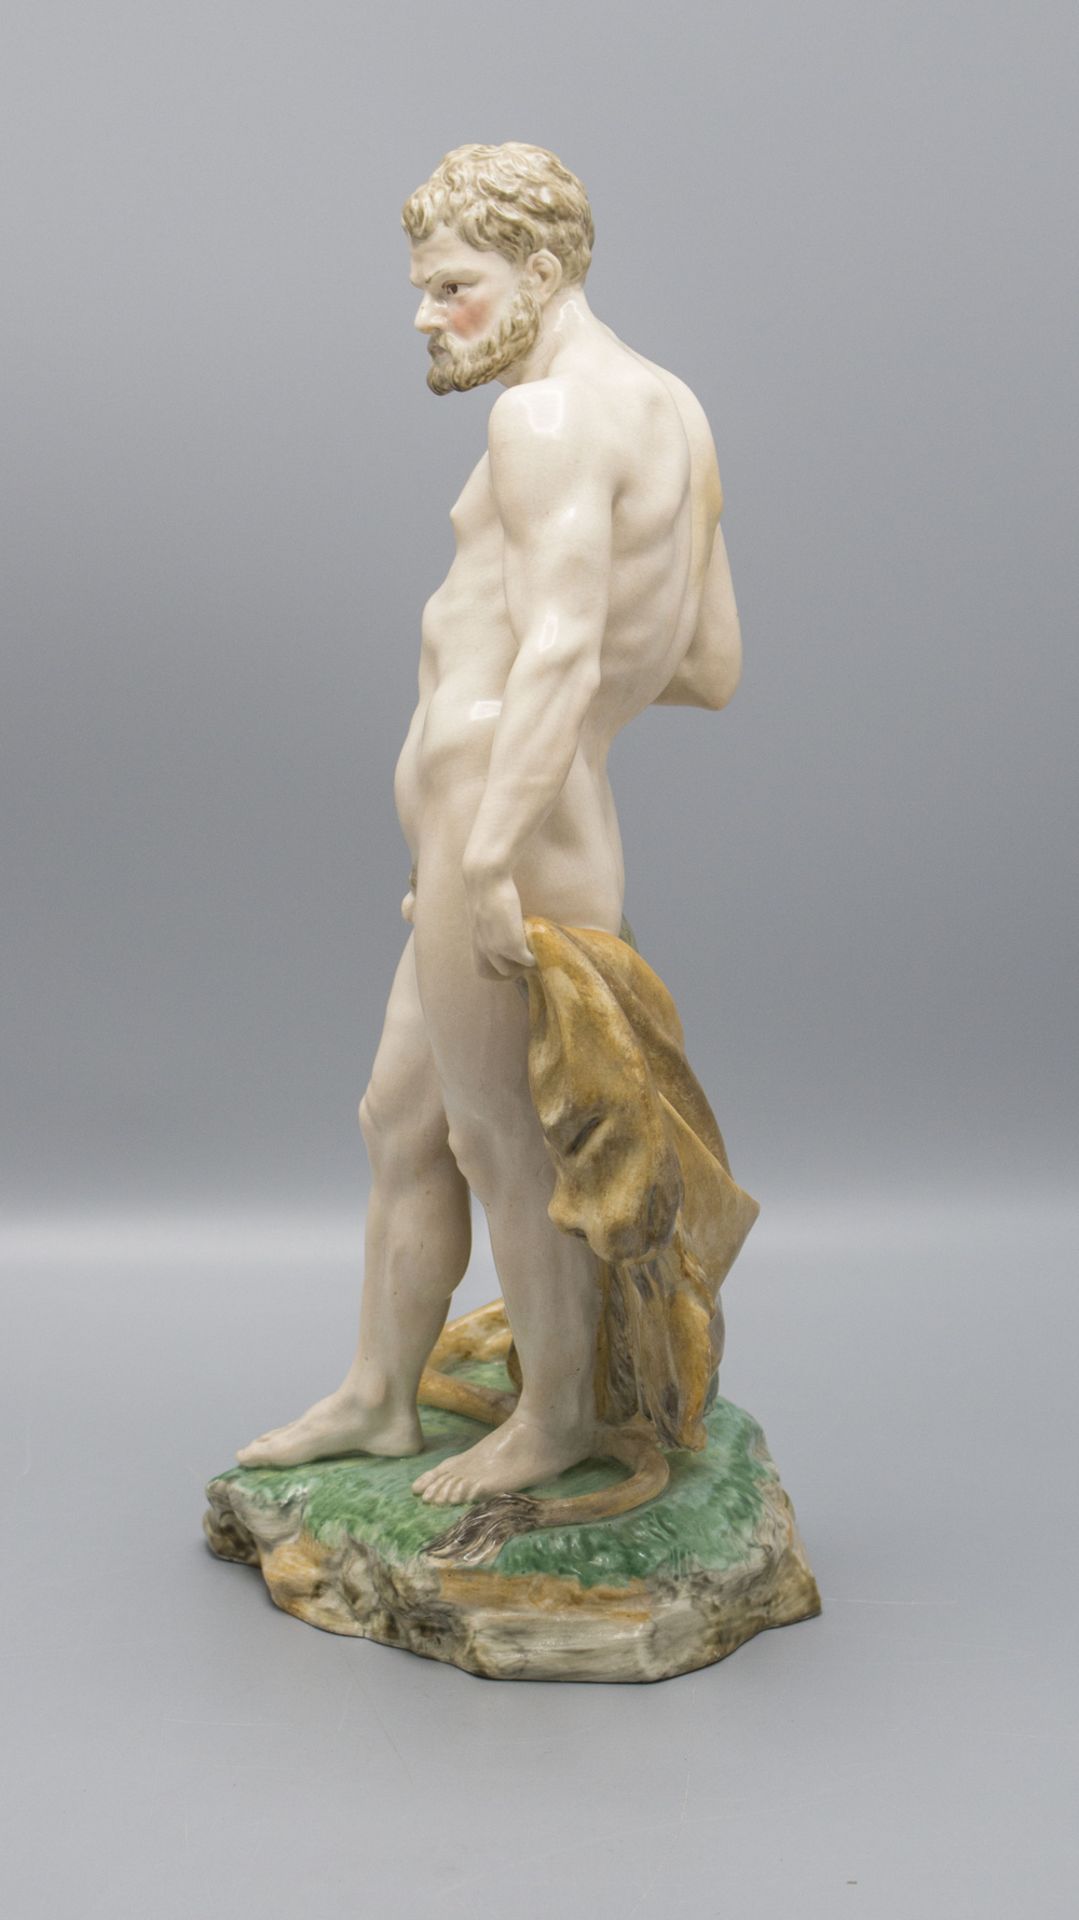 Große Figur des Herakles mit Löwenfell und Keule / A large figure of Heracles with lion skin ... - Image 2 of 5